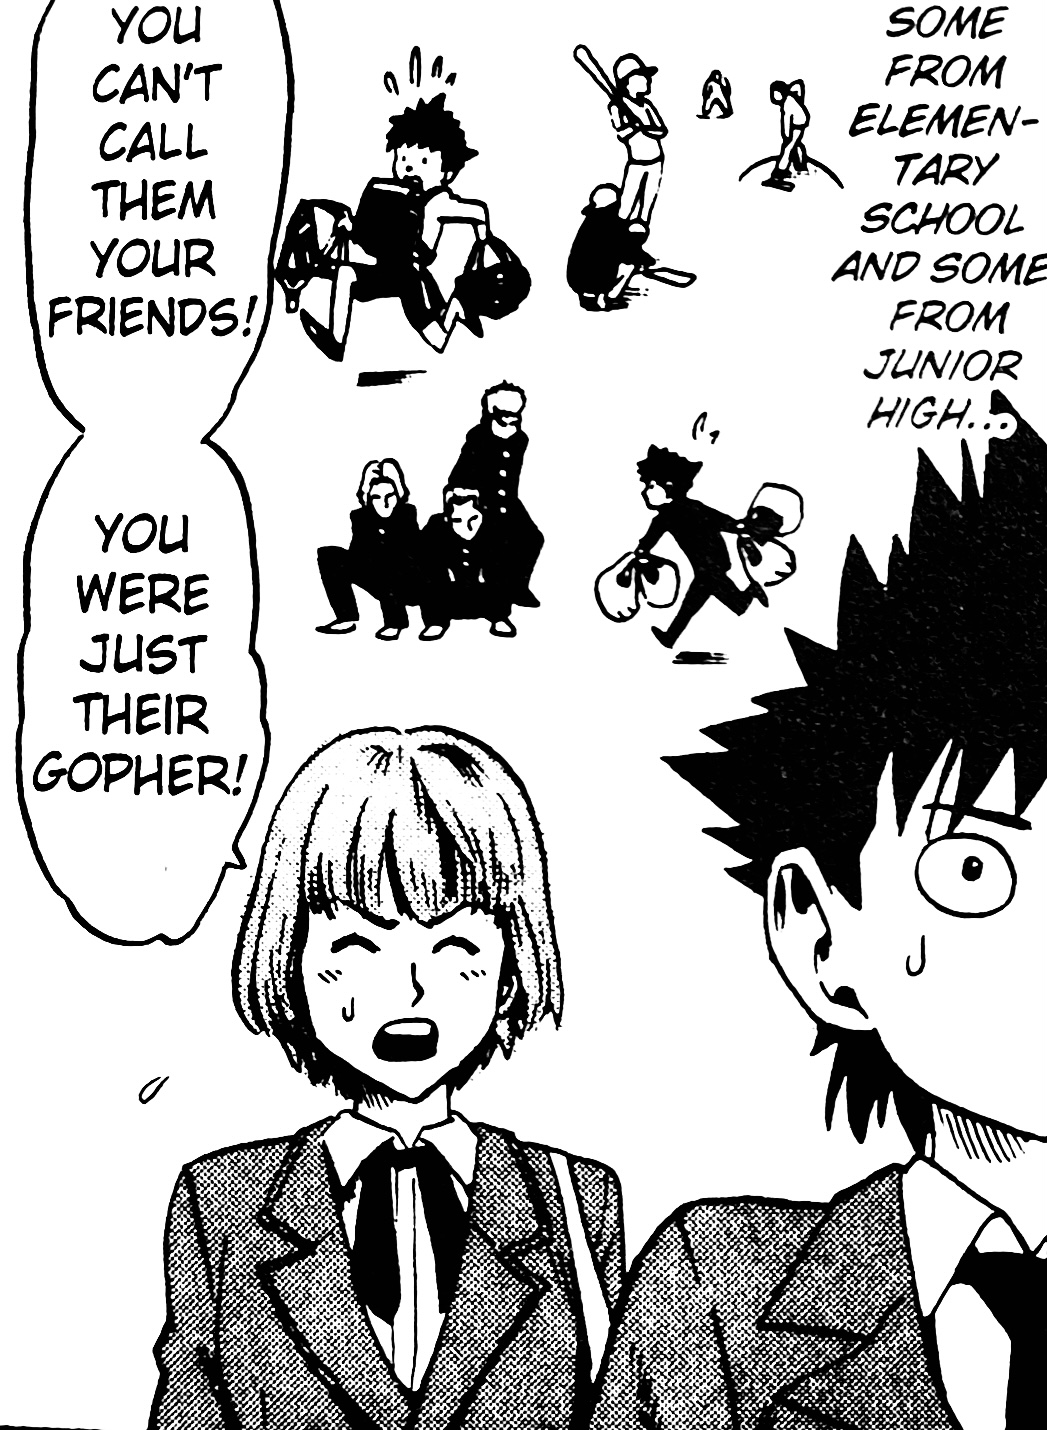 A manga panel of Sena recalling his 'friends' when he was younger. 'Some from elementary school and some from junior high...' he recalls. An exasperated Mamori corrects him, 'You can't call them your friends! You were just their gopher!'